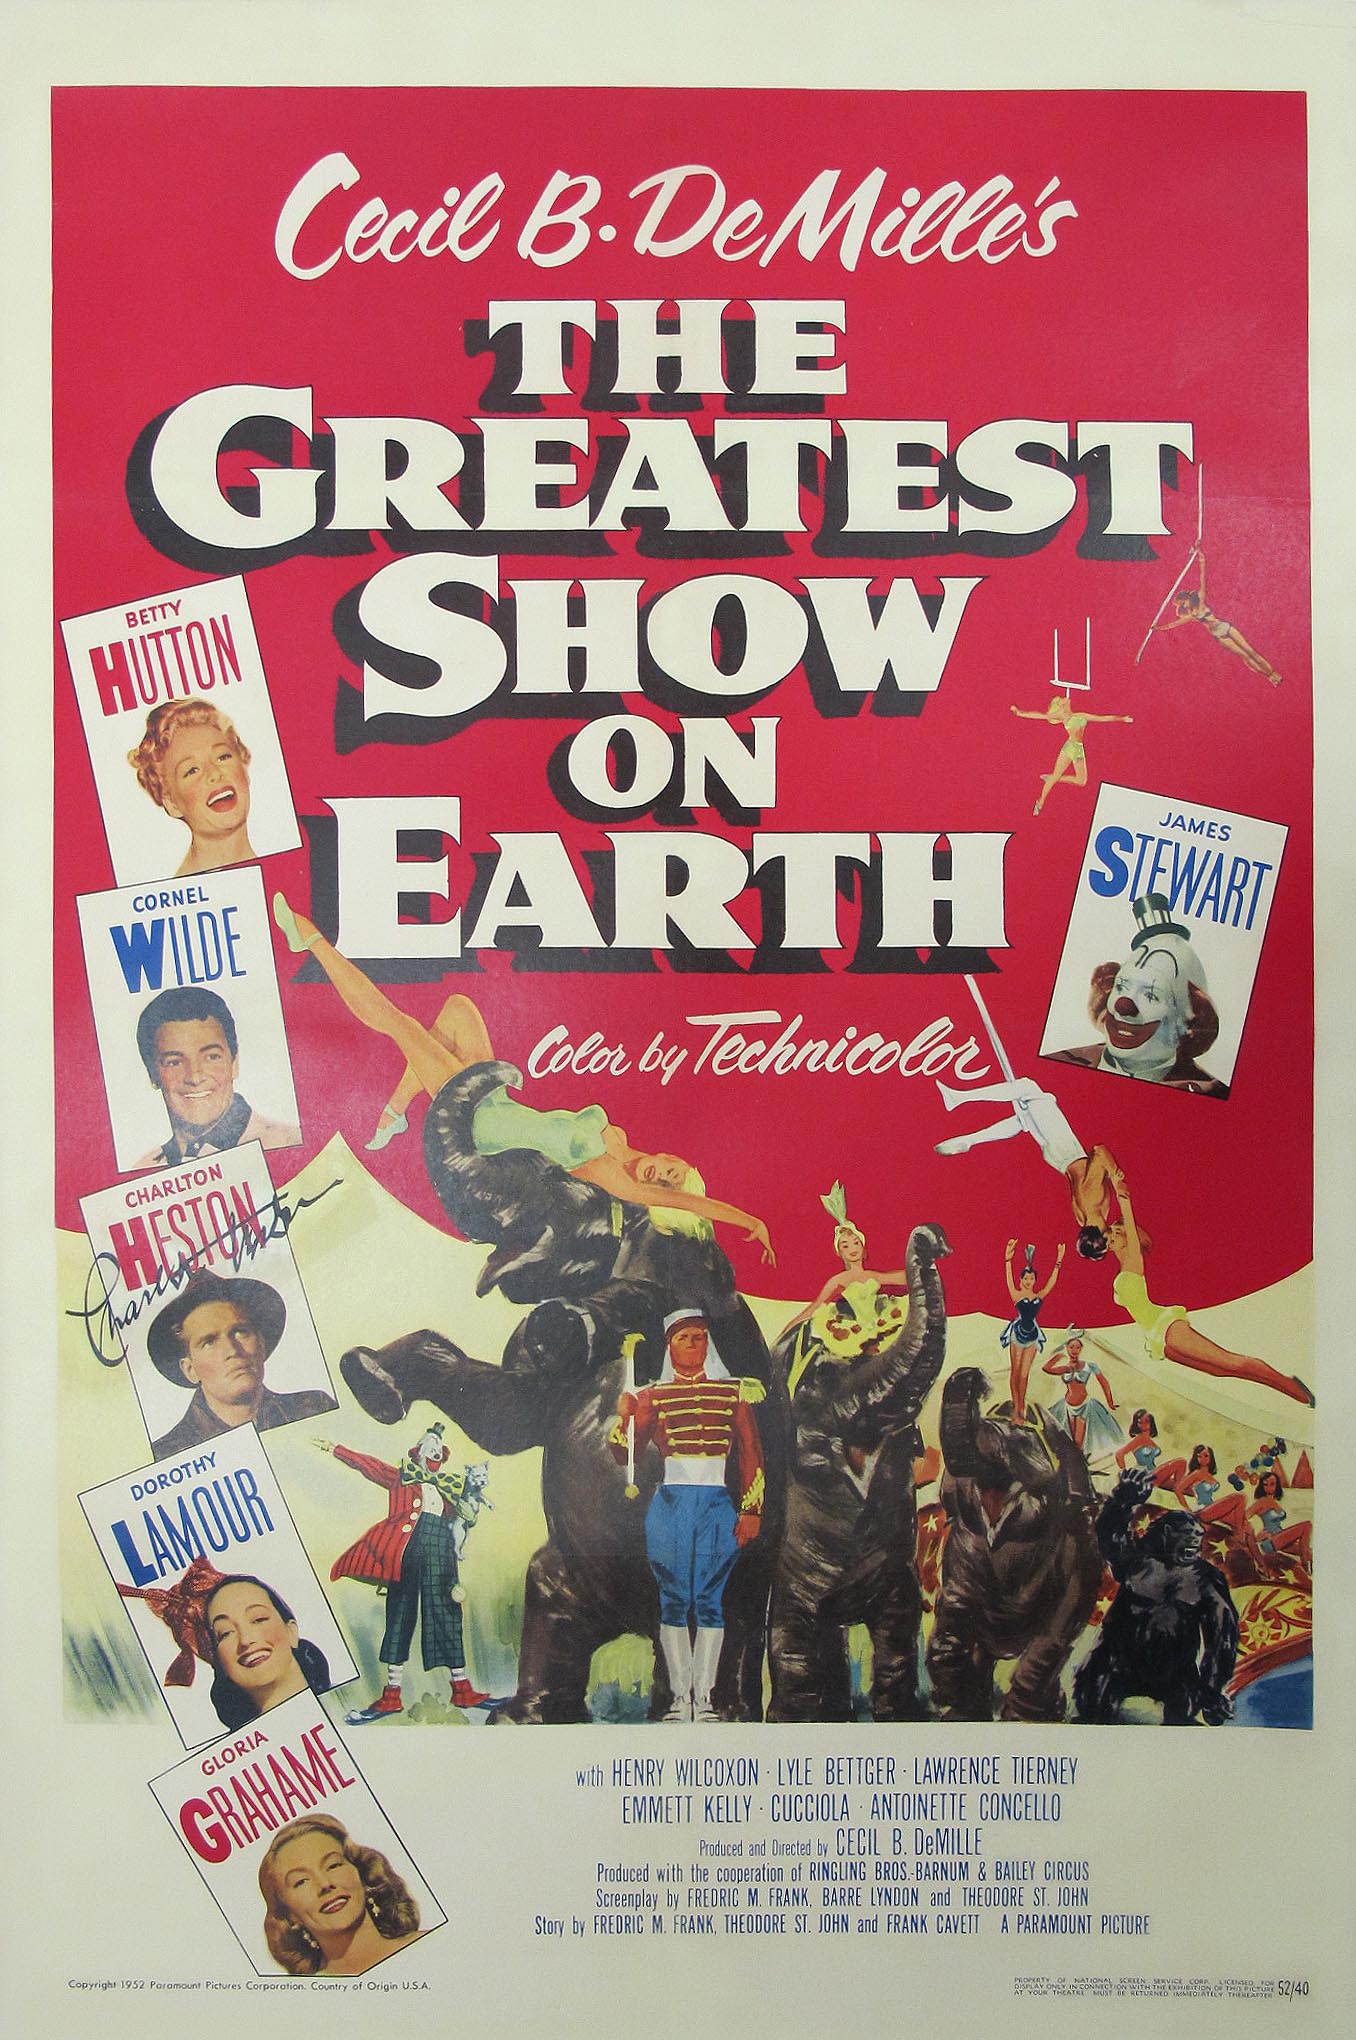 The Greatest Show On Earth